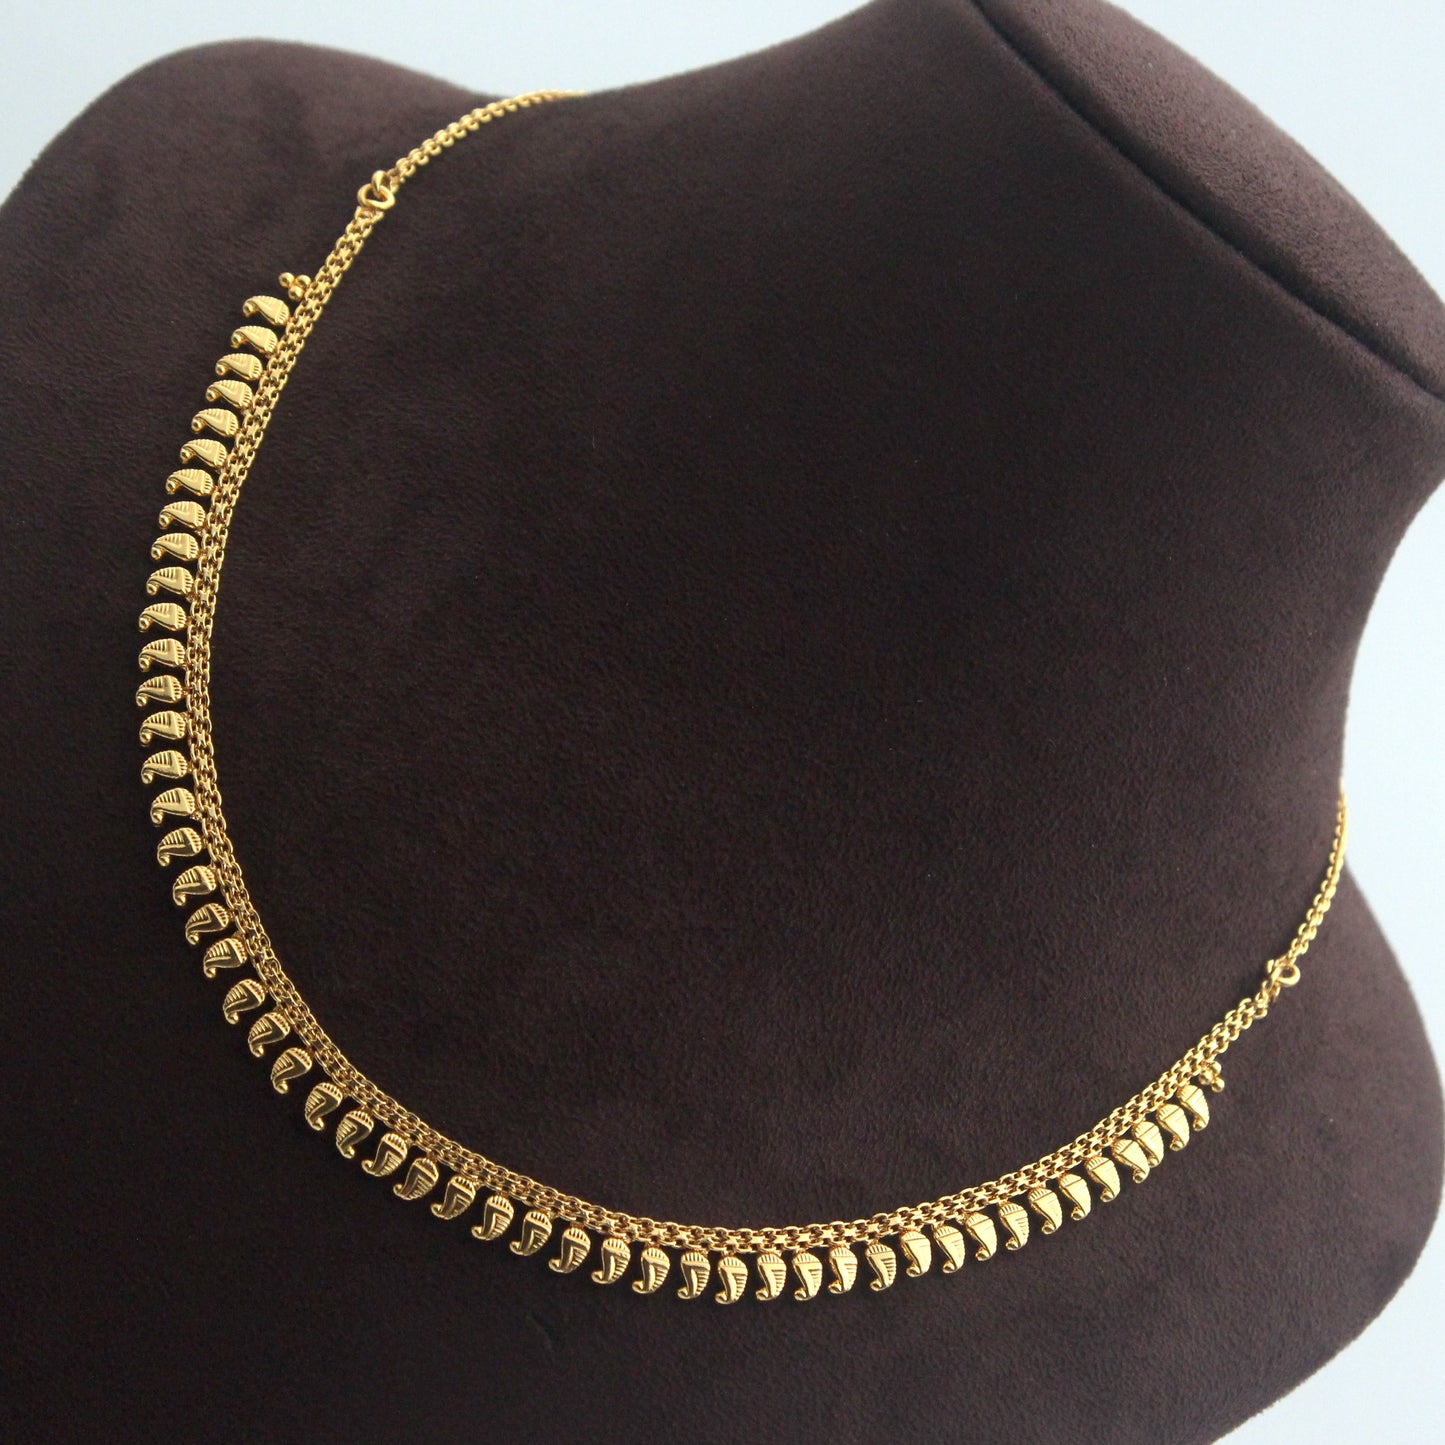 Real Gold Tone Very Lightweight Paisley Maanga Necklace - MNG 3